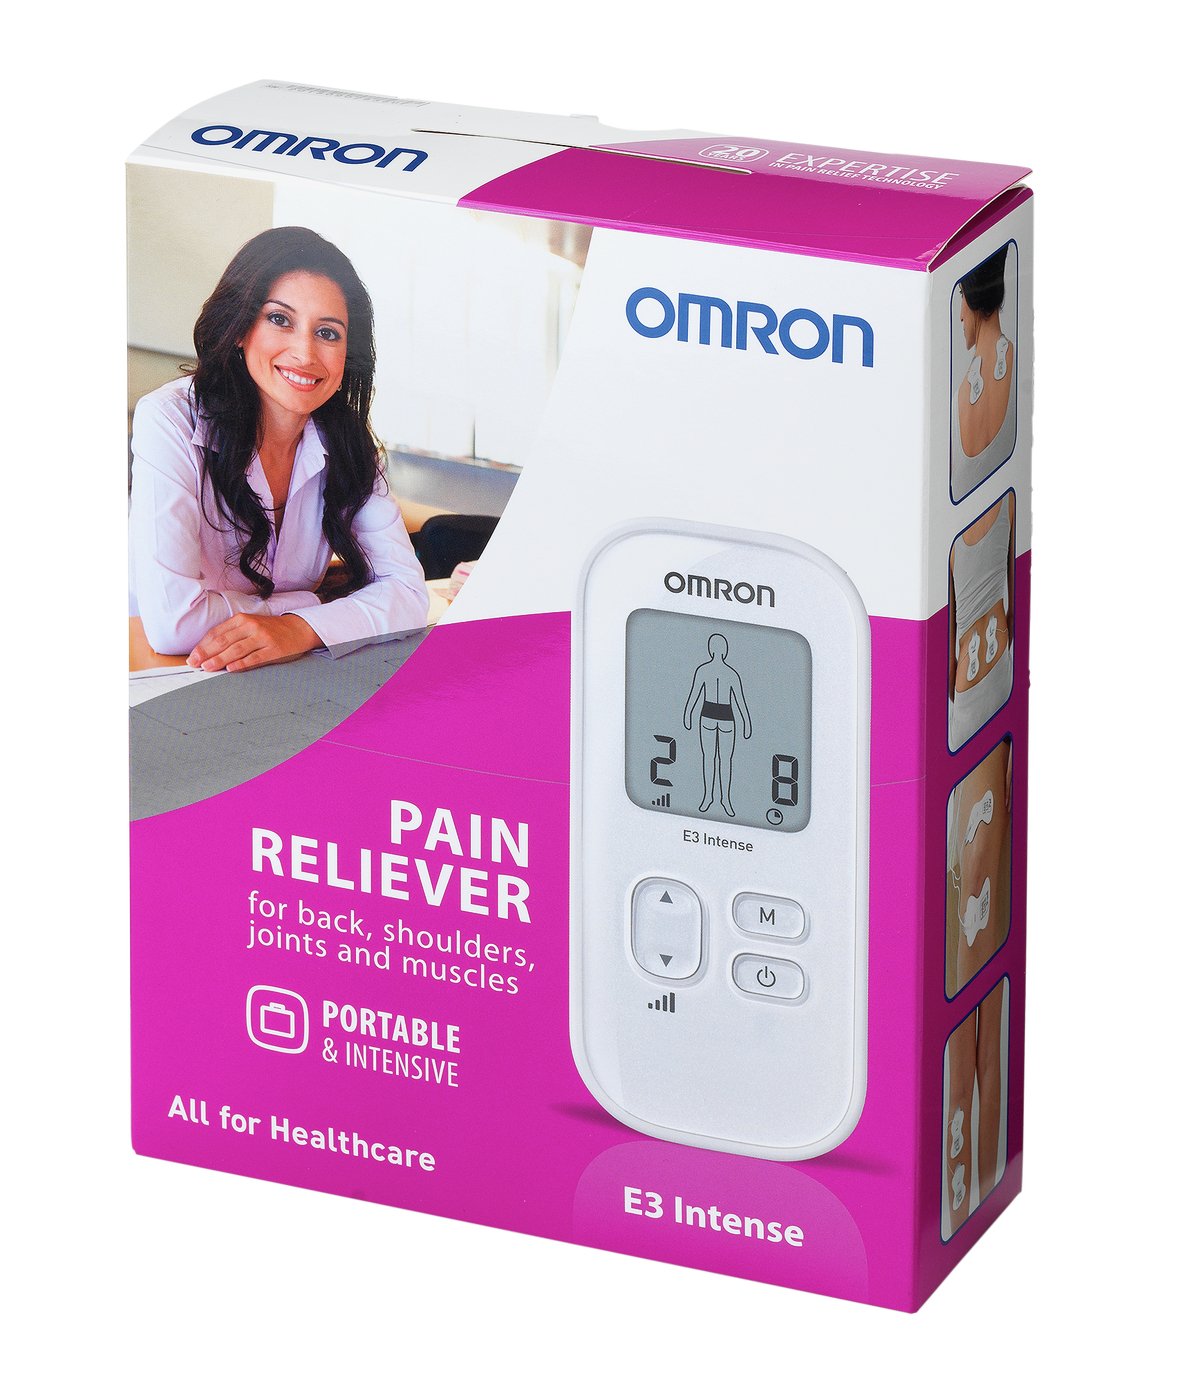 Omron E3 Intense Pain Management Tens Machine Review